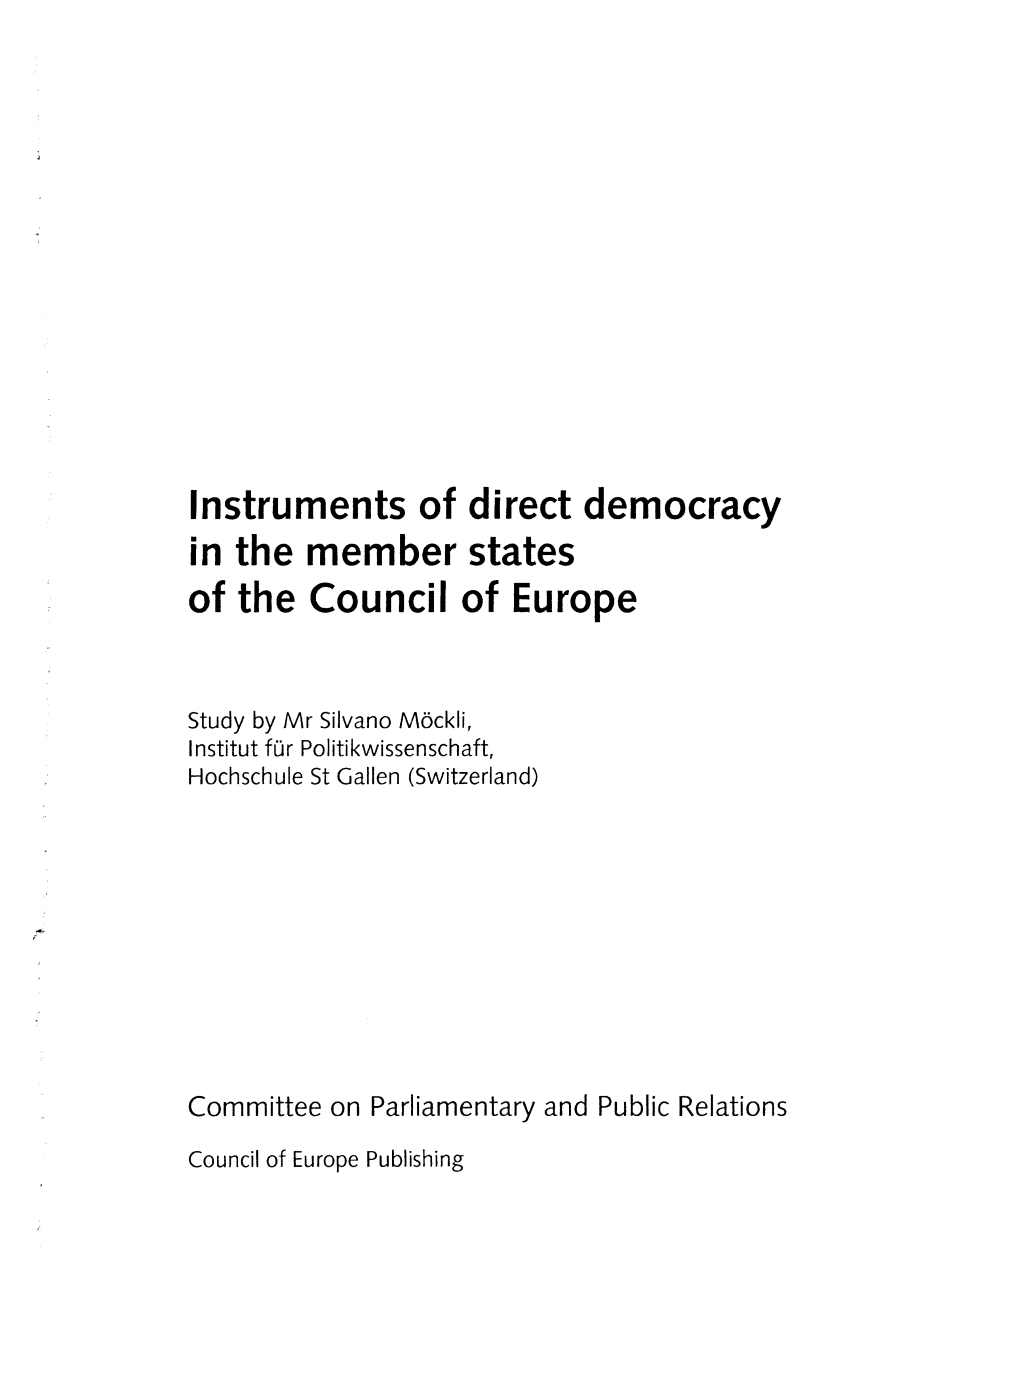 Instruments of Direct Democracy in the Member States of the Council of Europe